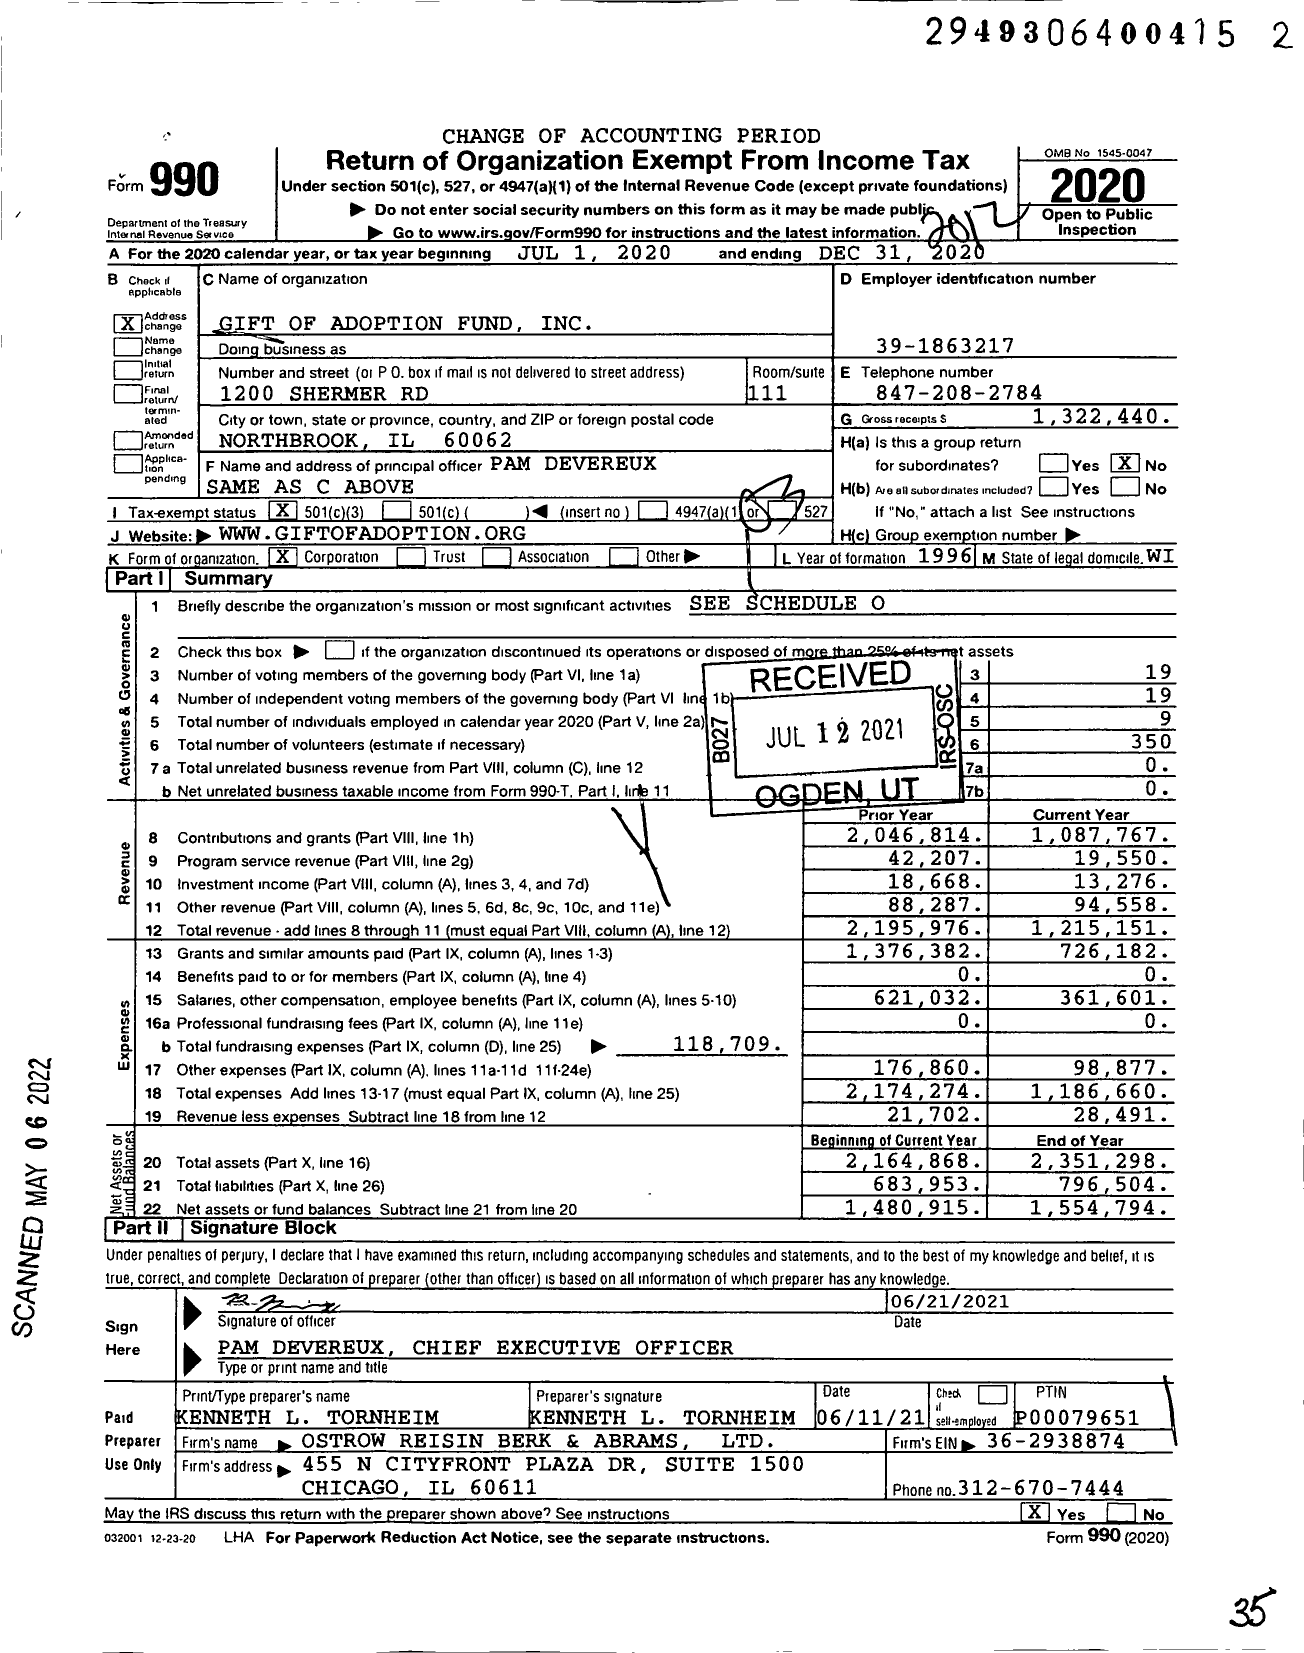 Image of first page of 2020 Form 990 for Gift of Adoption Fund